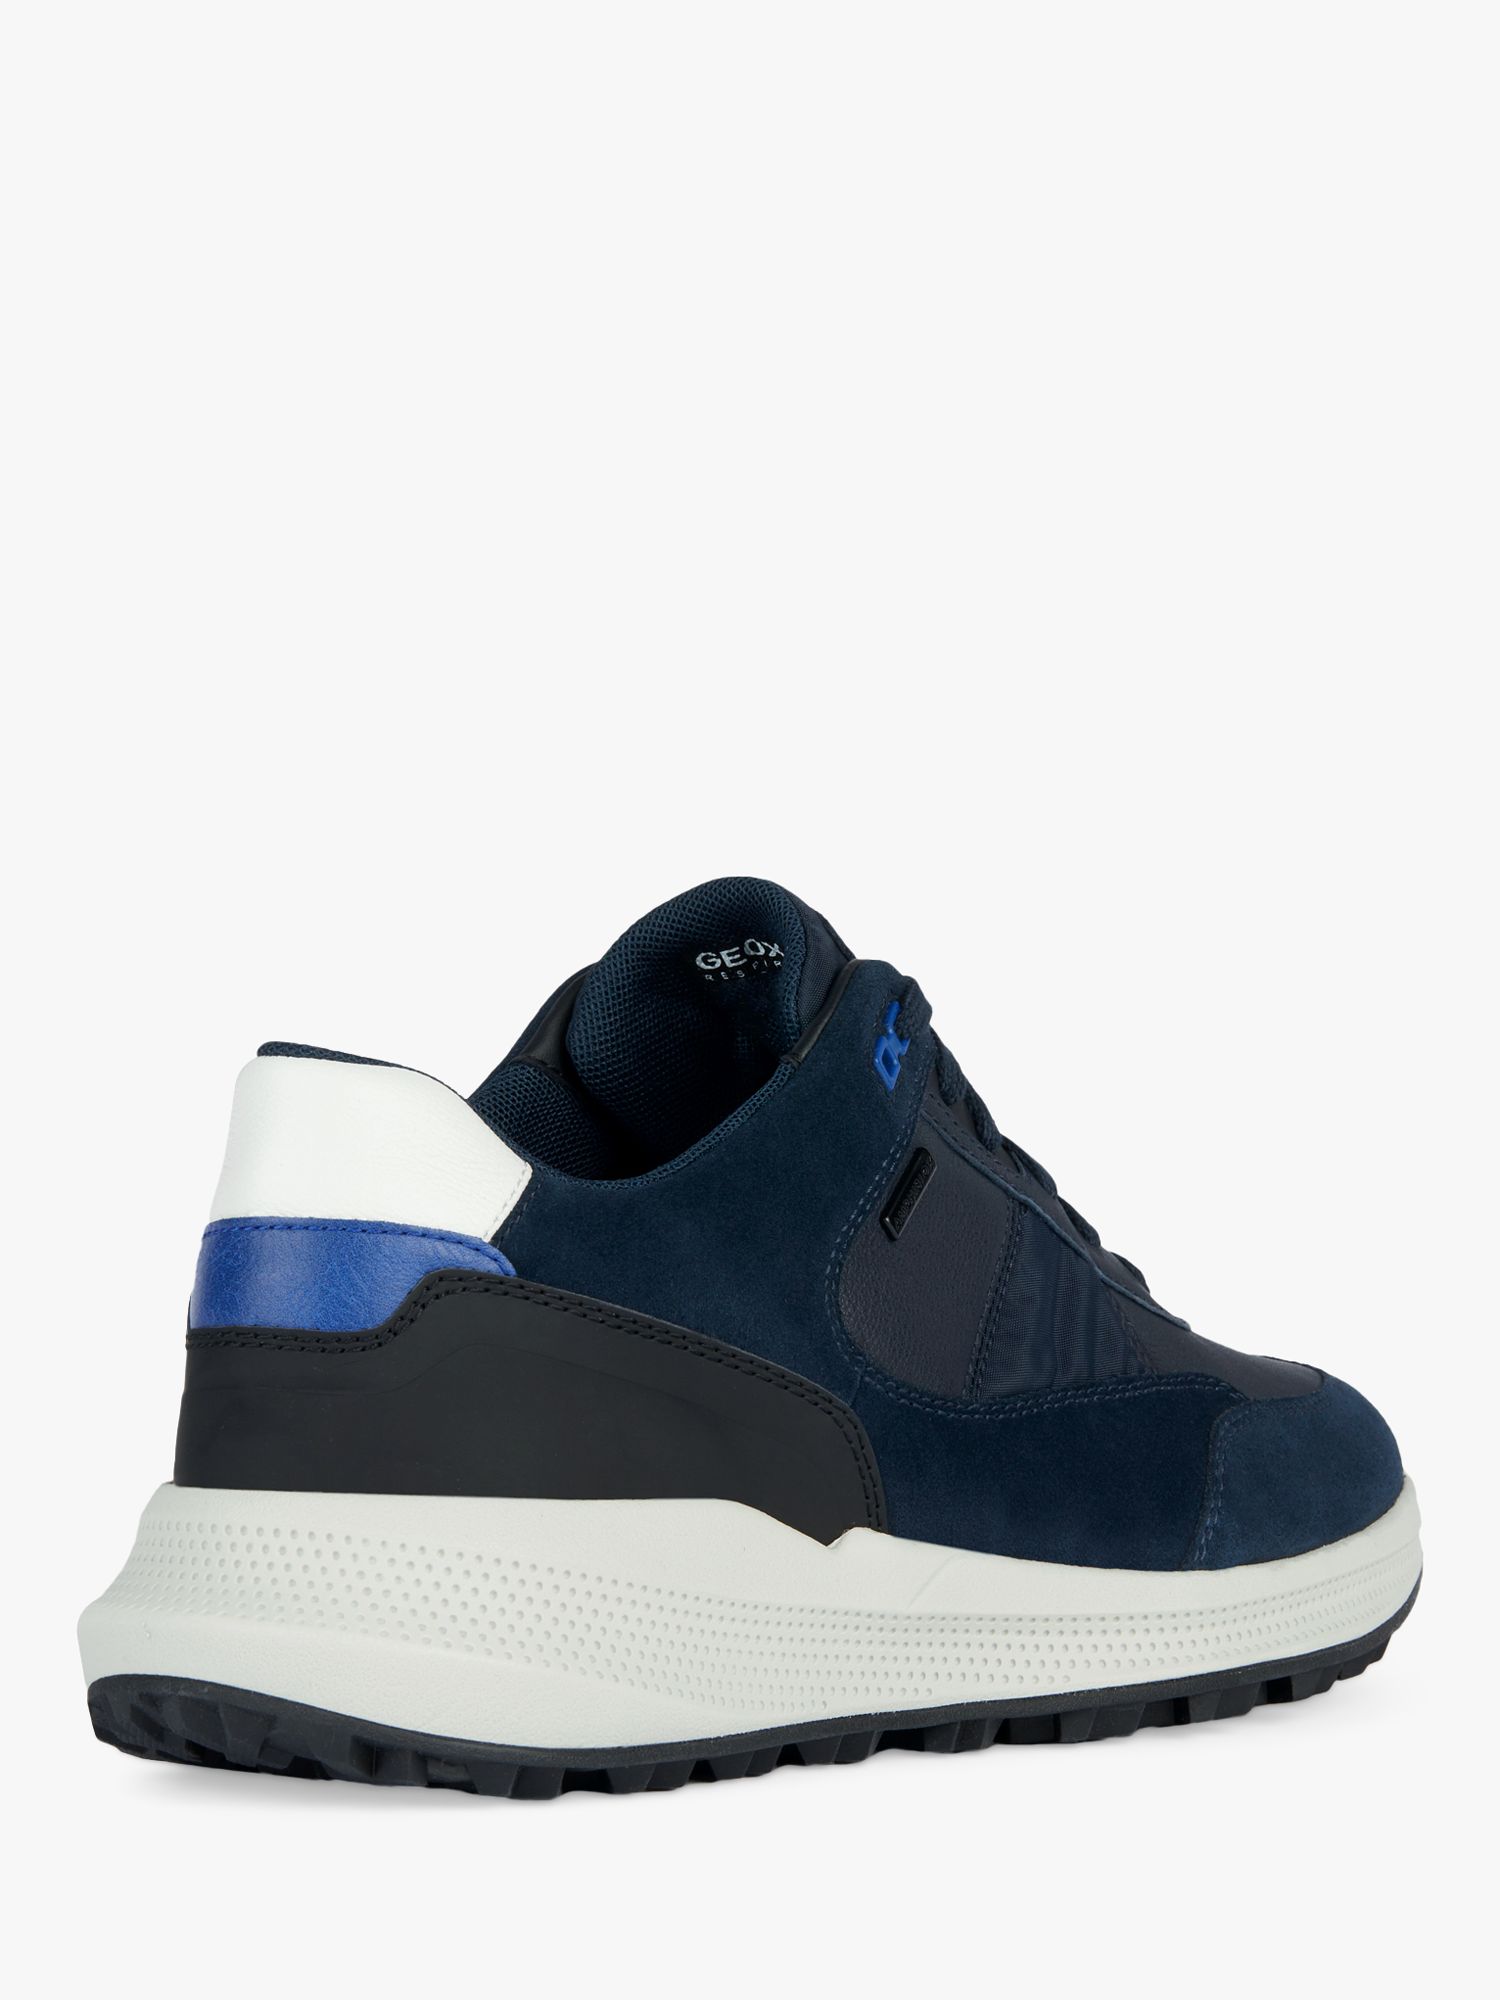 Geox Wide Fit PG1X ABX Men's Trainers, Navy at John Lewis & Partners